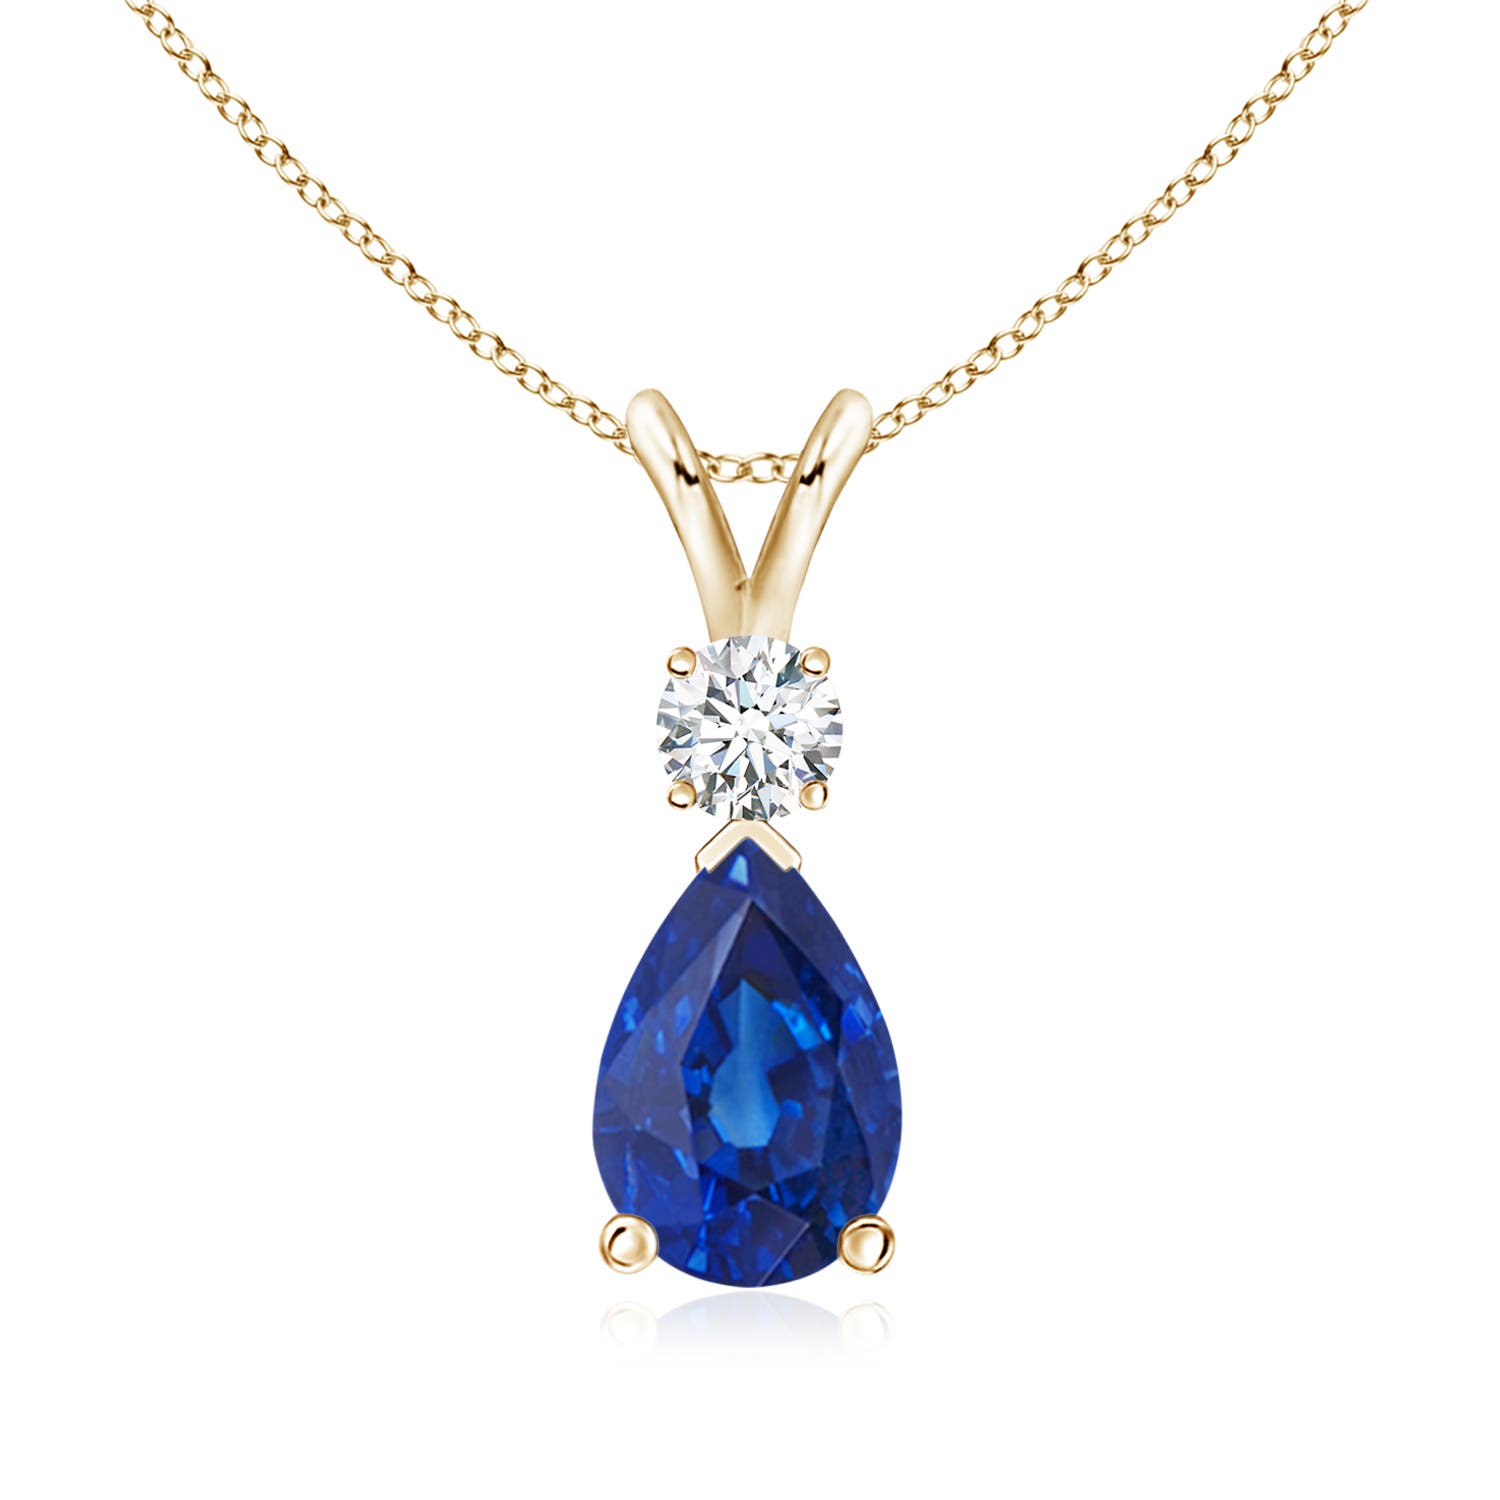 AAA- Blue Sapphire / 1.68 CT / 14 KT Yellow Gold